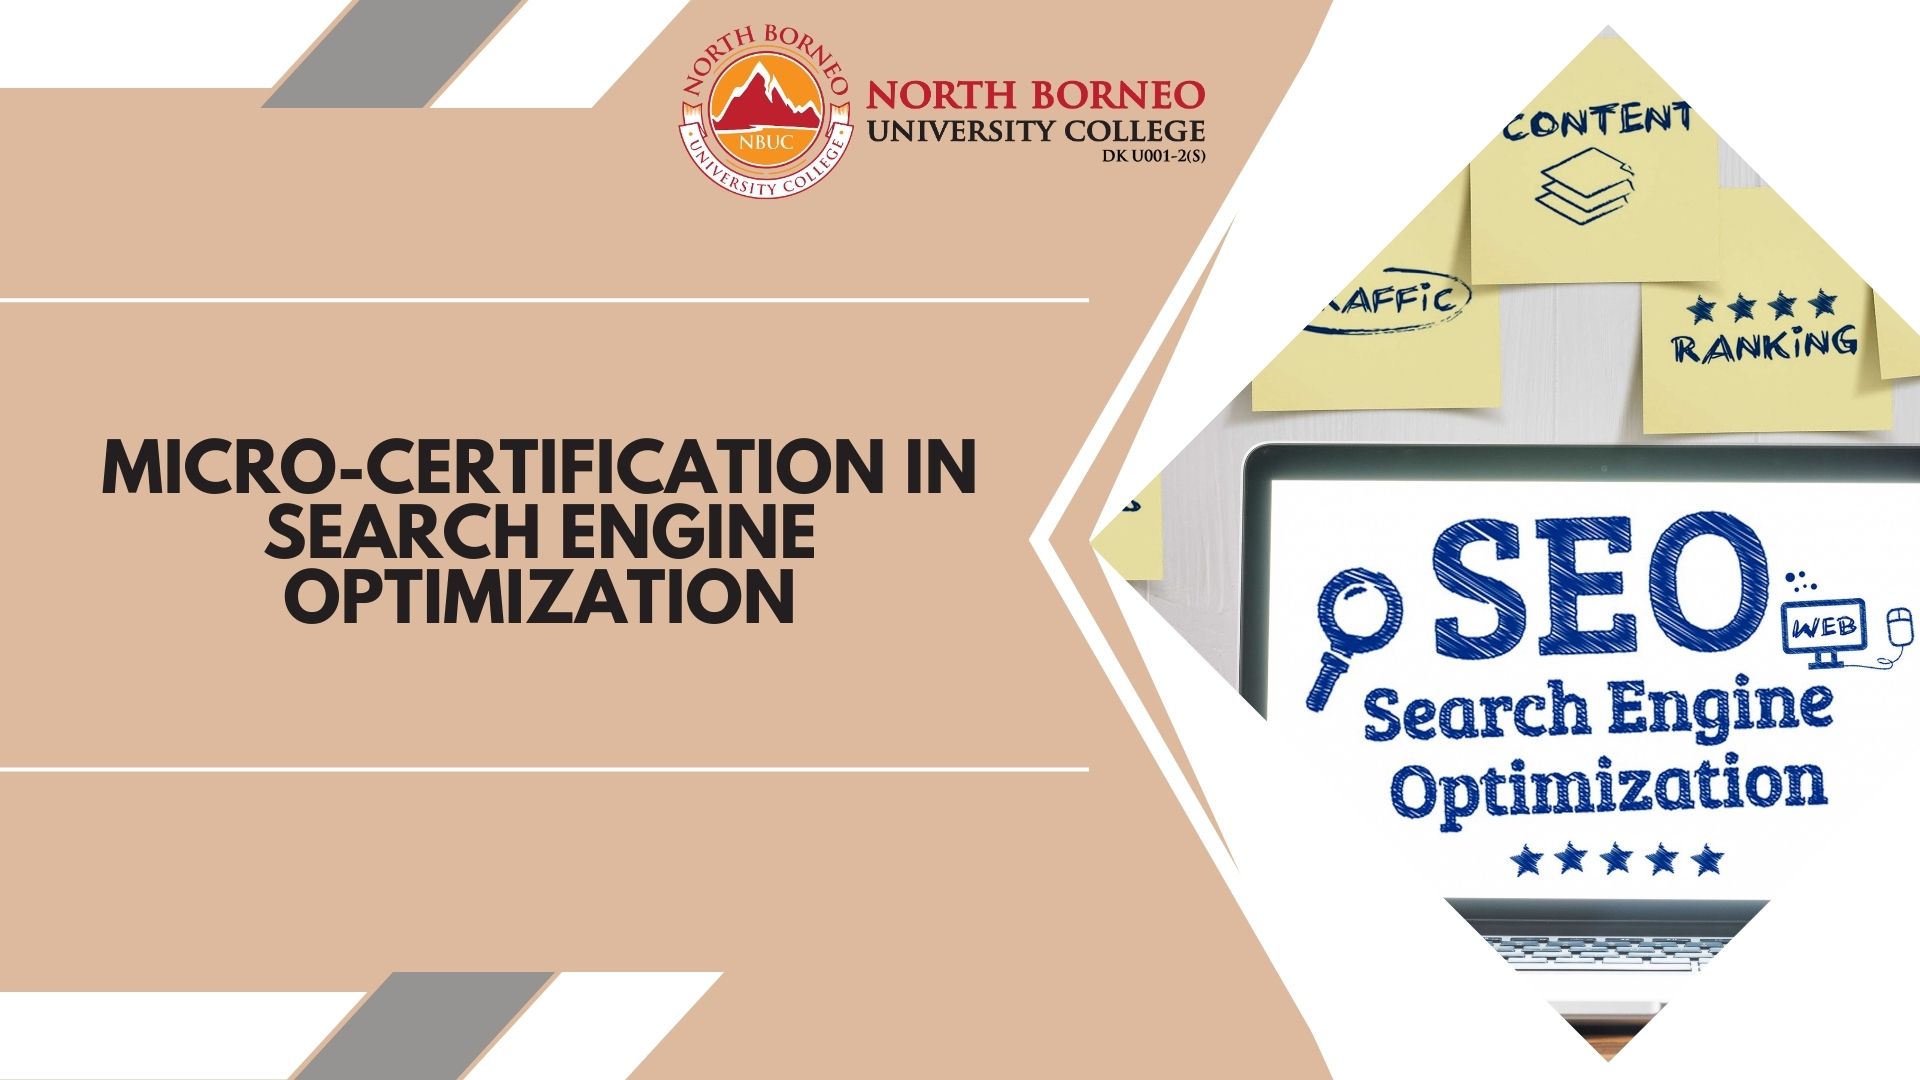 MICRO-CERTIFICATION IN SEARCH ENGINE OPTIMIZATION